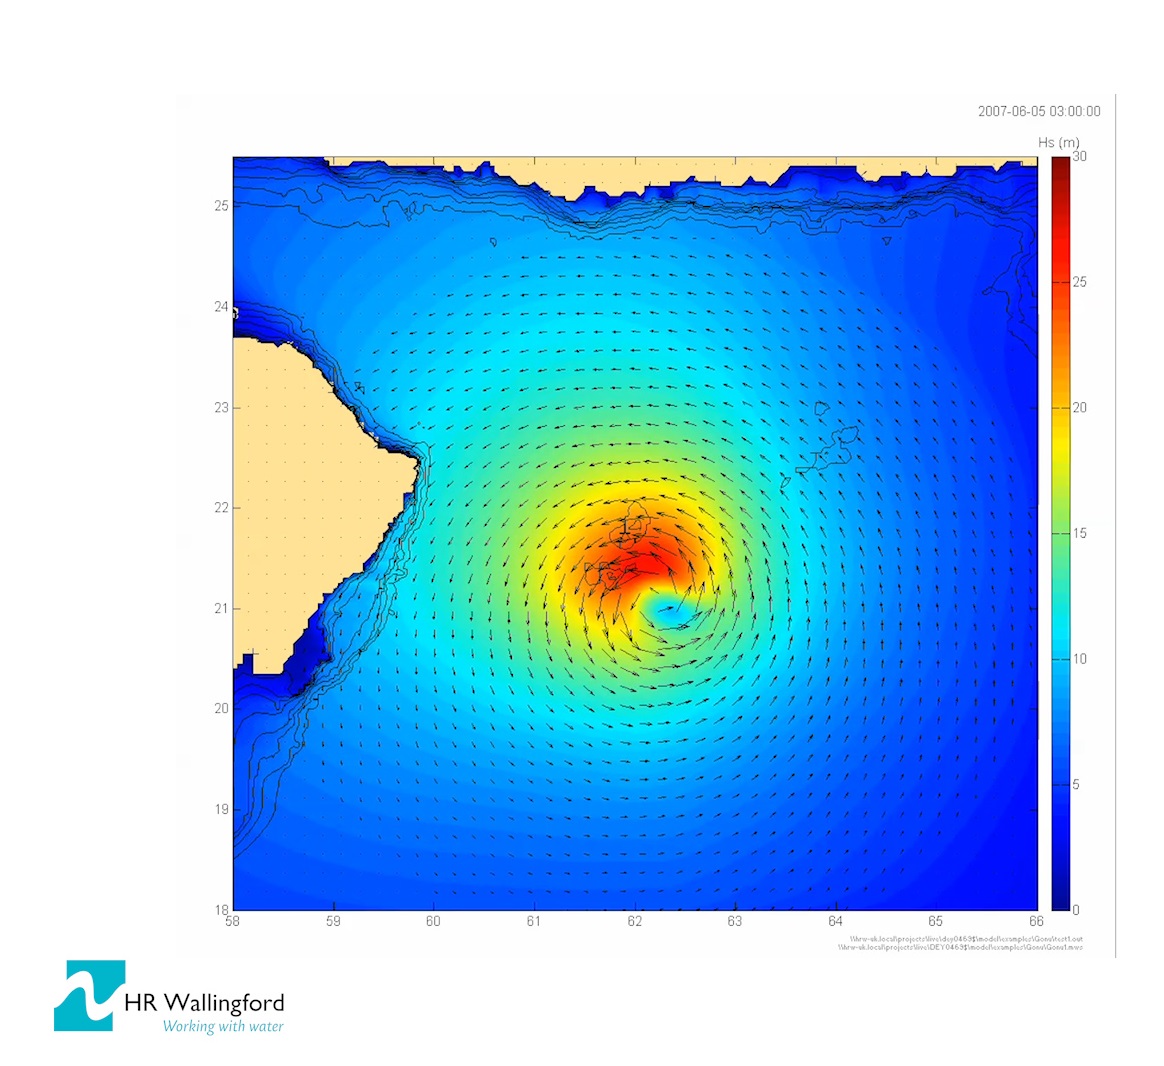 2 Modelling of Cyclone Gonu by HR Wallingford